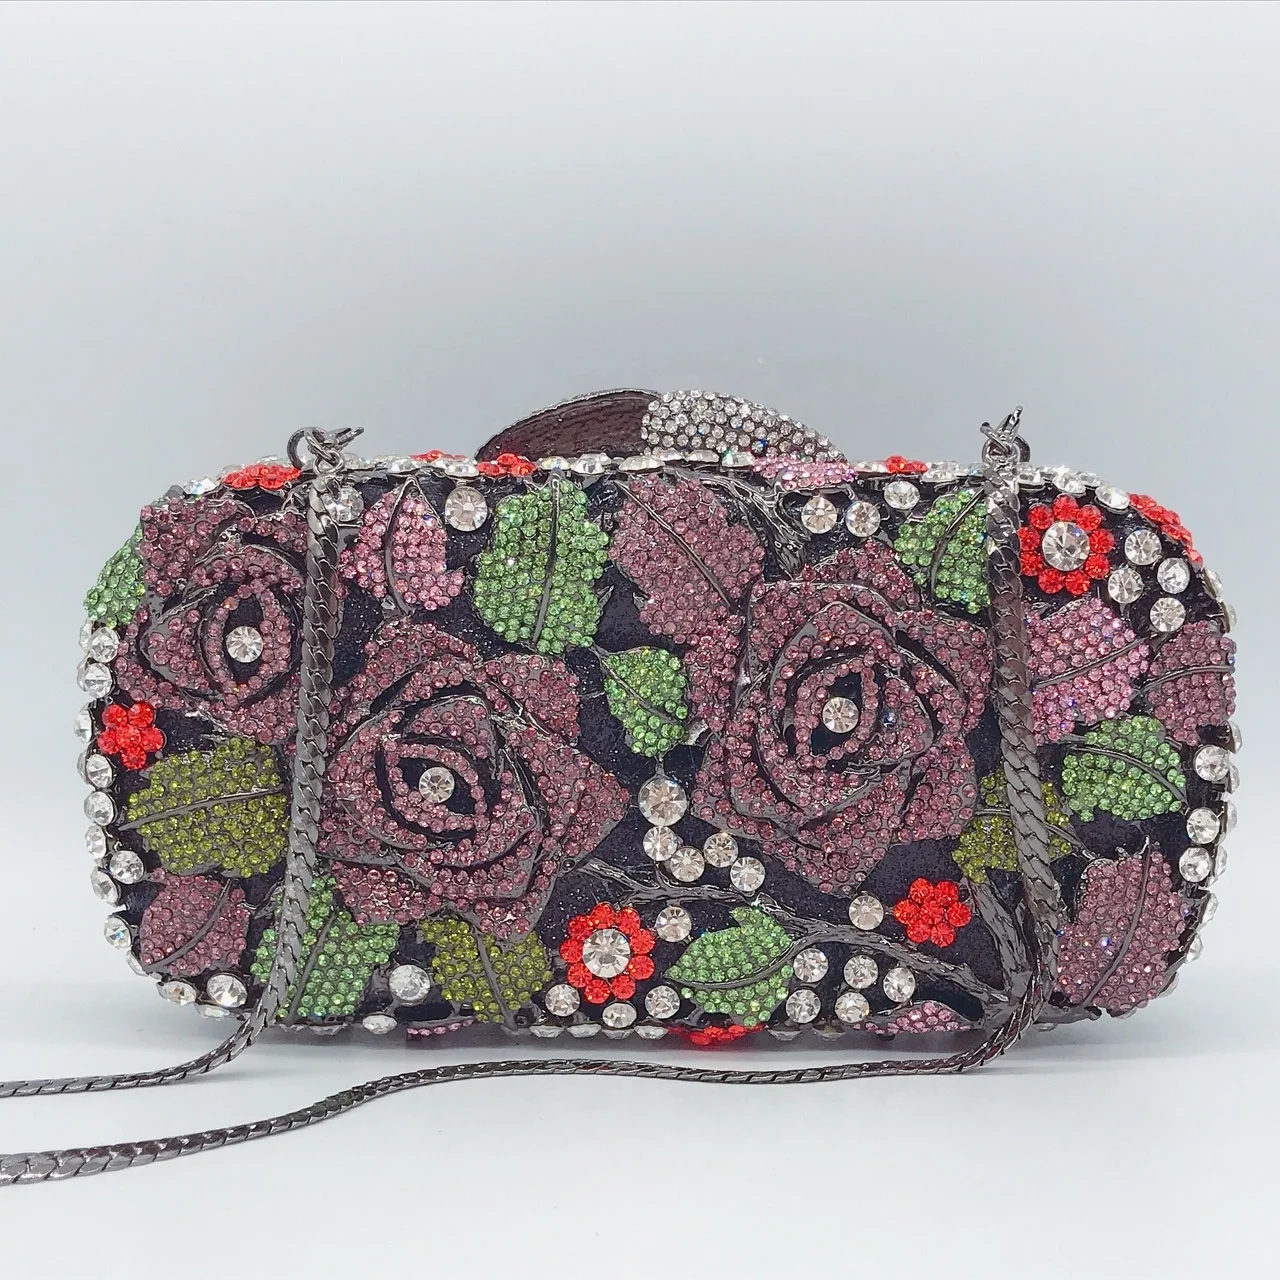 Amiqi MRY92 Luxury Handmade Sequin and beaded flower crystal ladies clutch bag clutches evening bag